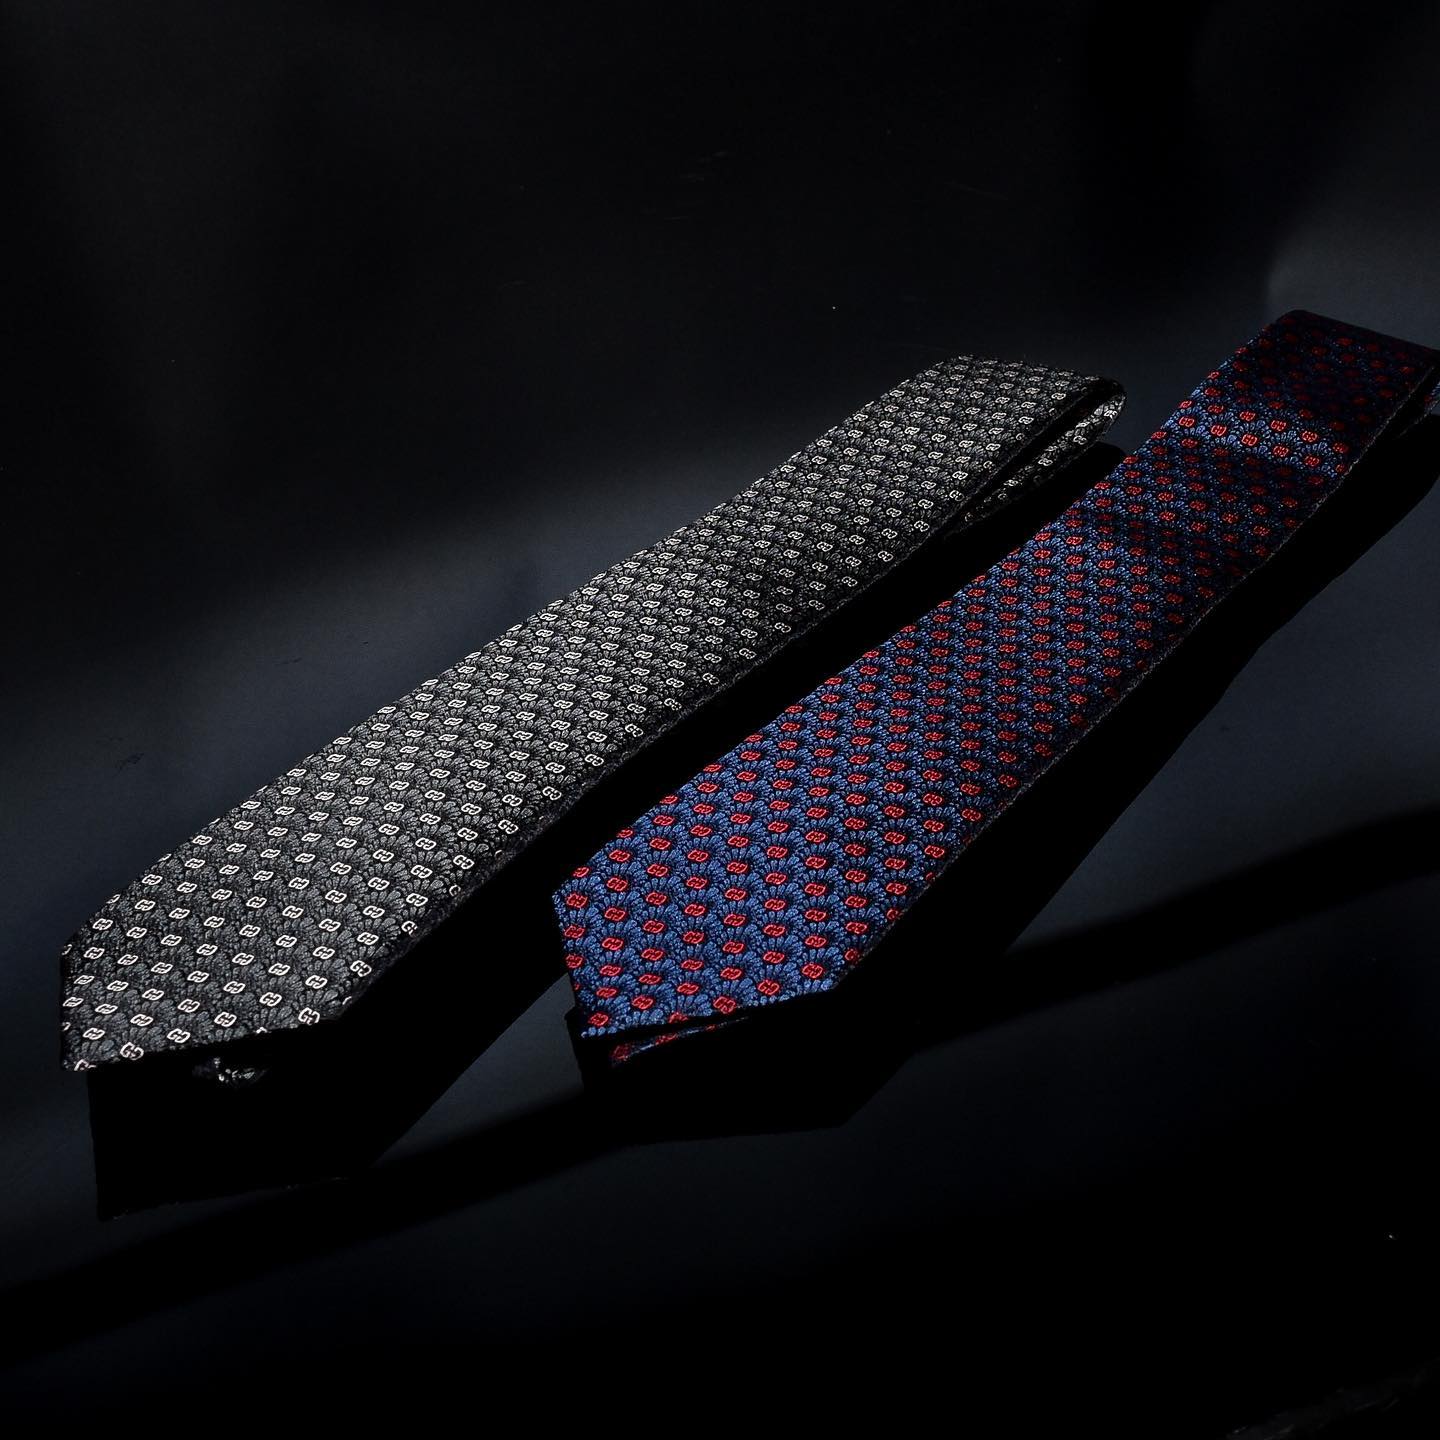 CAVAT  Gucci Ties ... Which Colour You PickingFDGD.jpg